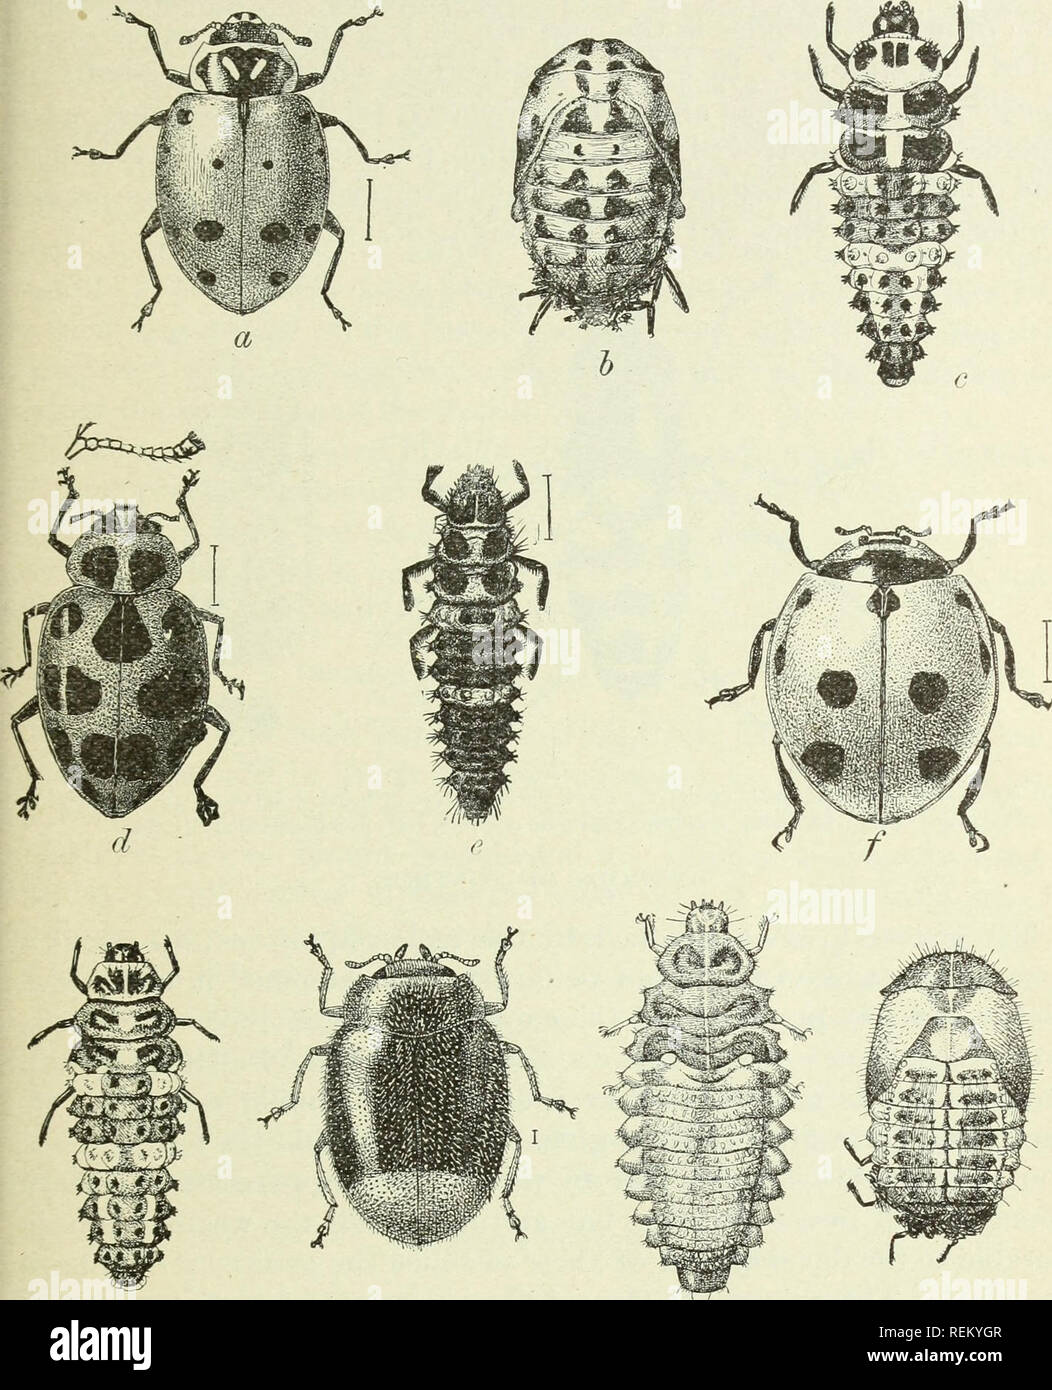 . Circular. Insects. 7 quently mistaken for the parent of the aphides. Another very efficient enemy, the nine-spotted ladybird, is shown in figure 3,/!, g. One of the most abundant syrphus-fly enemies is illustrated by figure 4.. g h i j Fig. 3.—a, Adult of convergent ladybird (Hippodamia convergent); b, pupa of same; c, larva of same; adult of spotted ladybird {Megilla maculata); e, larva of same; /, adult of nine-spotted ladybird (Coccinella 9-notata); g, larva of same; h, adult of Scymnusterminatus; i, larva of same; j, pupa of same. All enlarged; size indicated by hair line at right (autho Stock Photo